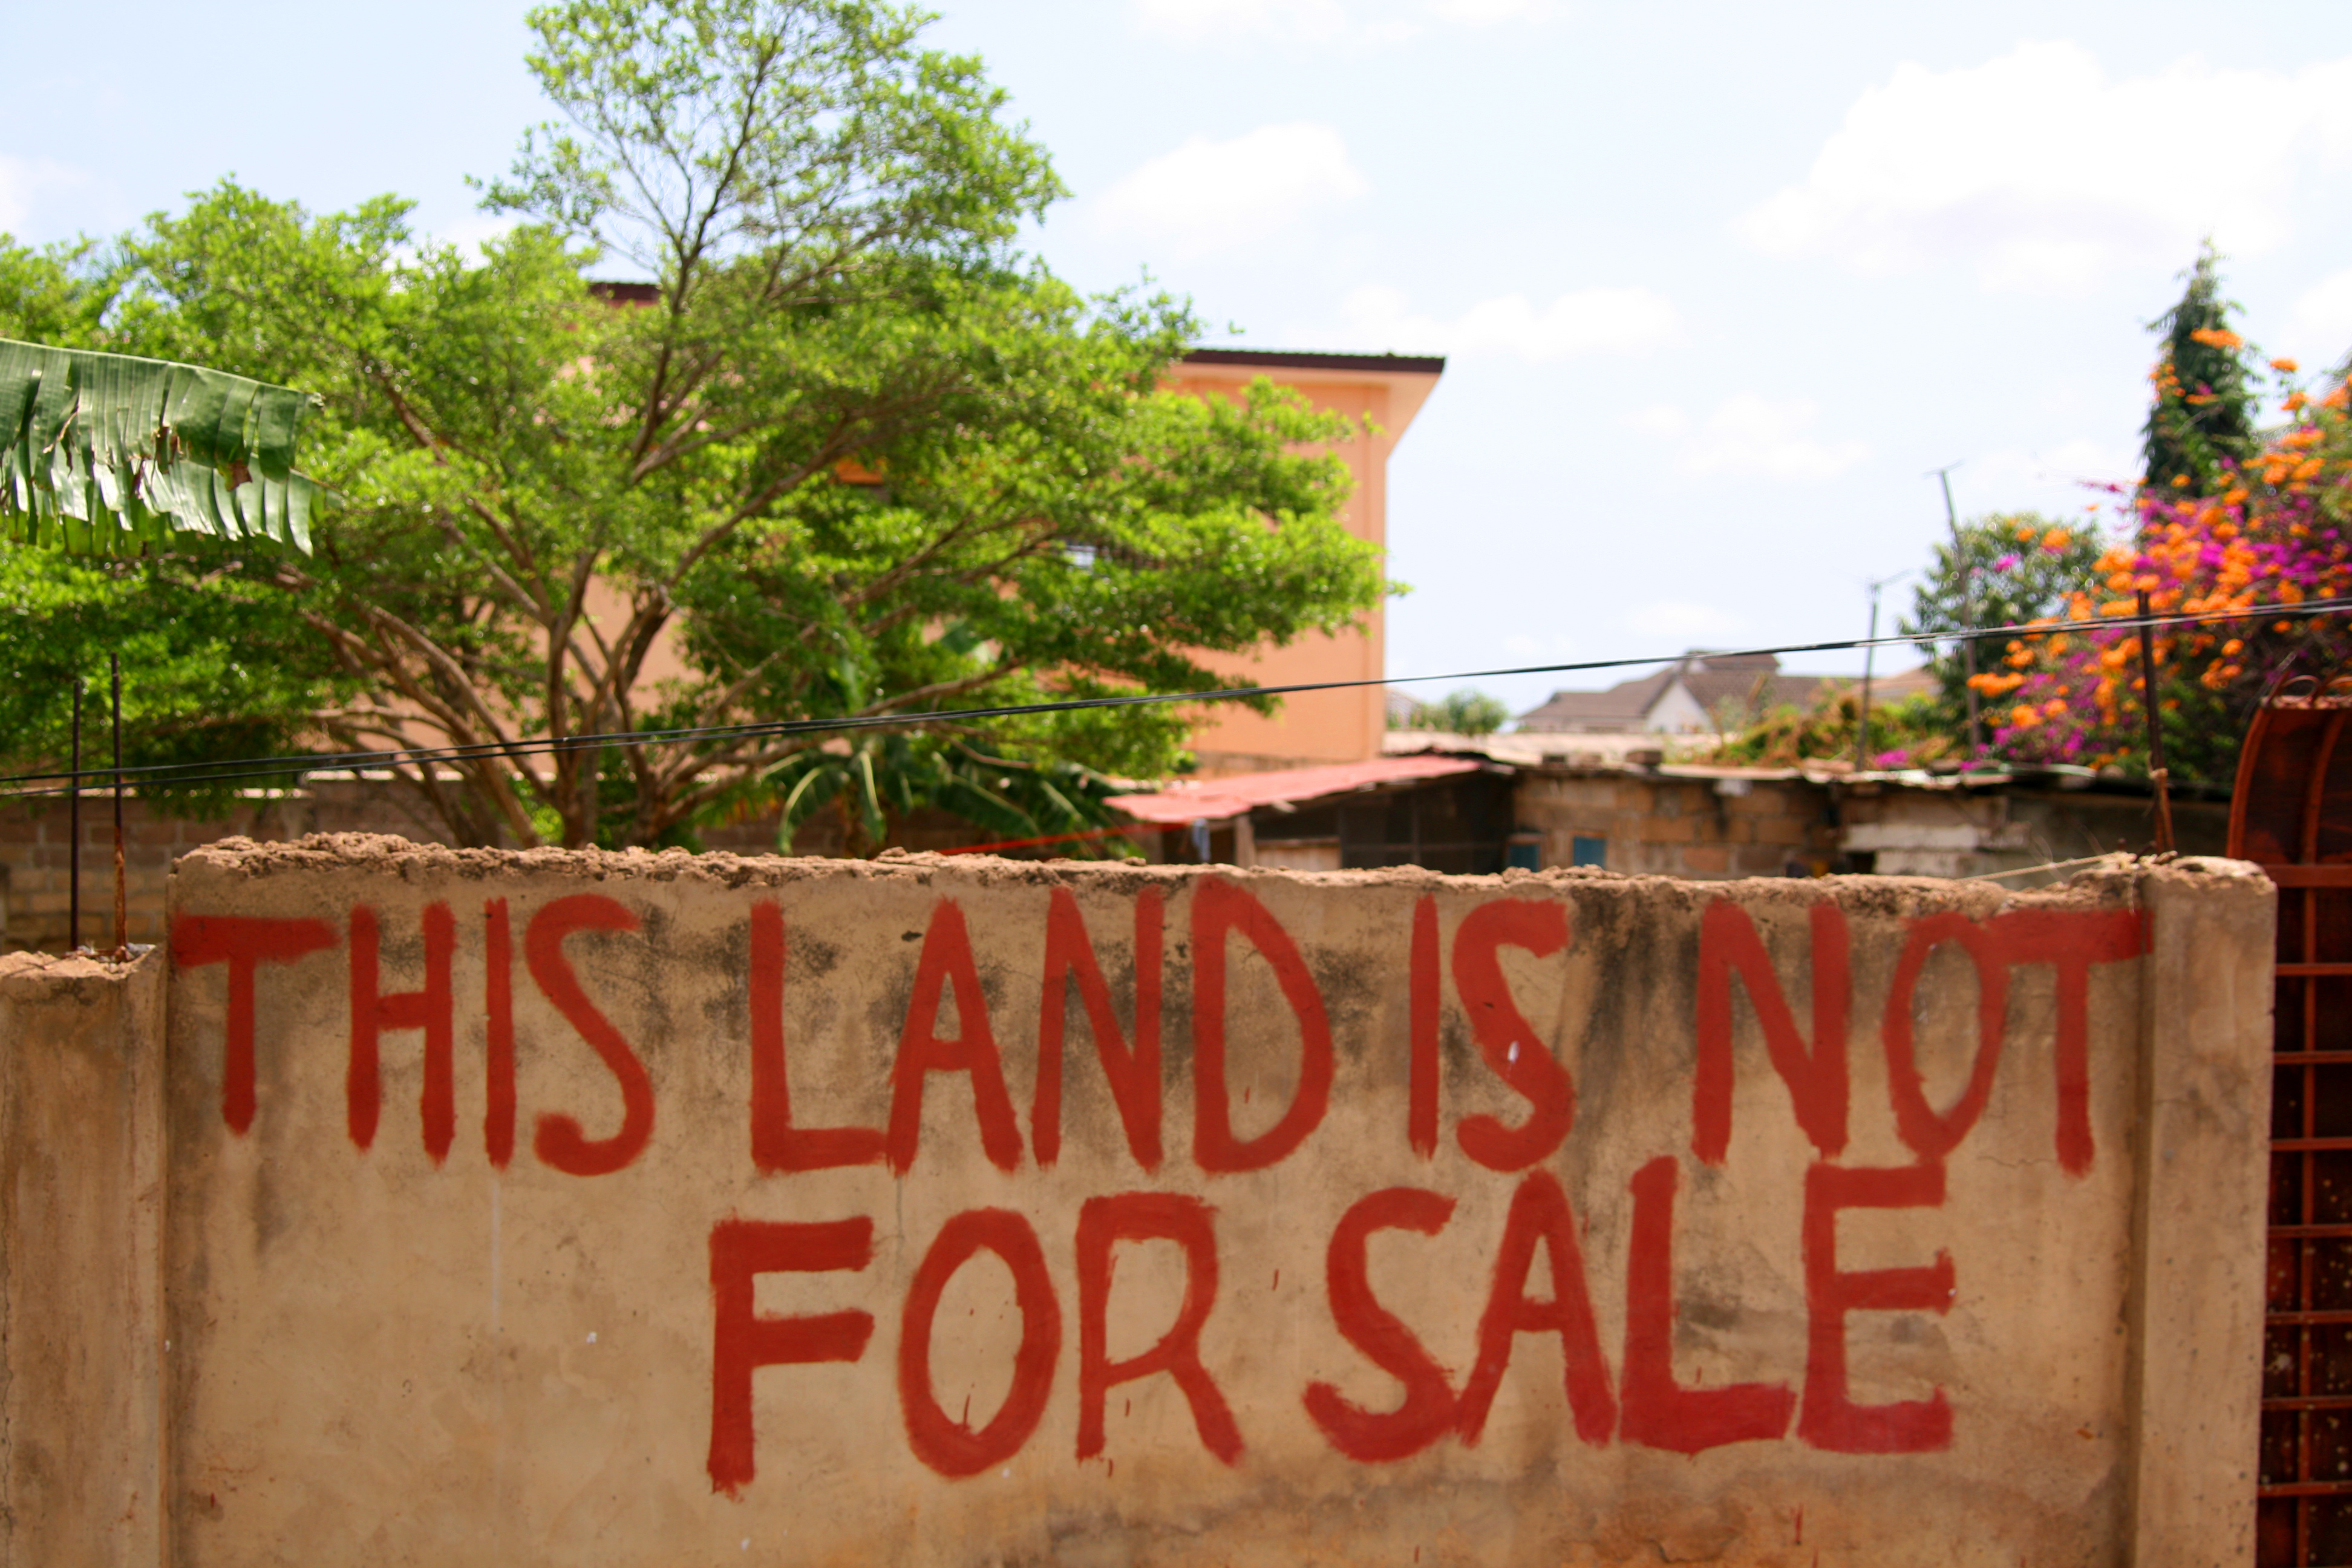 This land is not for sale